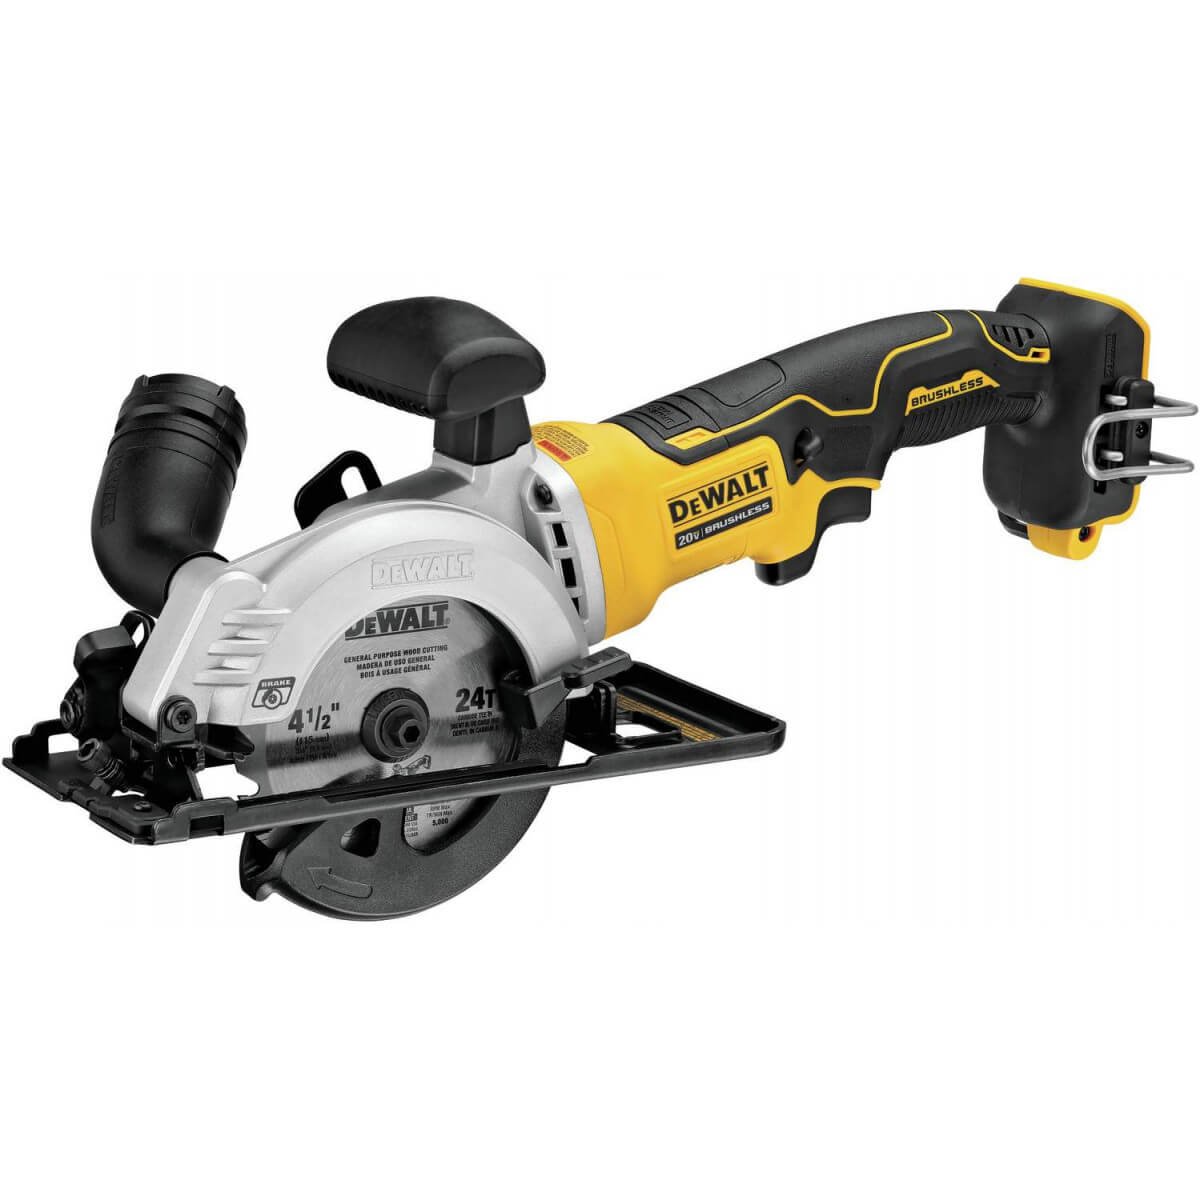 Dewalt DCS571B ATOMIC 20V MAX* BRUSHLESS 4-1/2 IN. CORDLESS CIRCULAR SAW (TOOL ONLY) - wise-line-tools